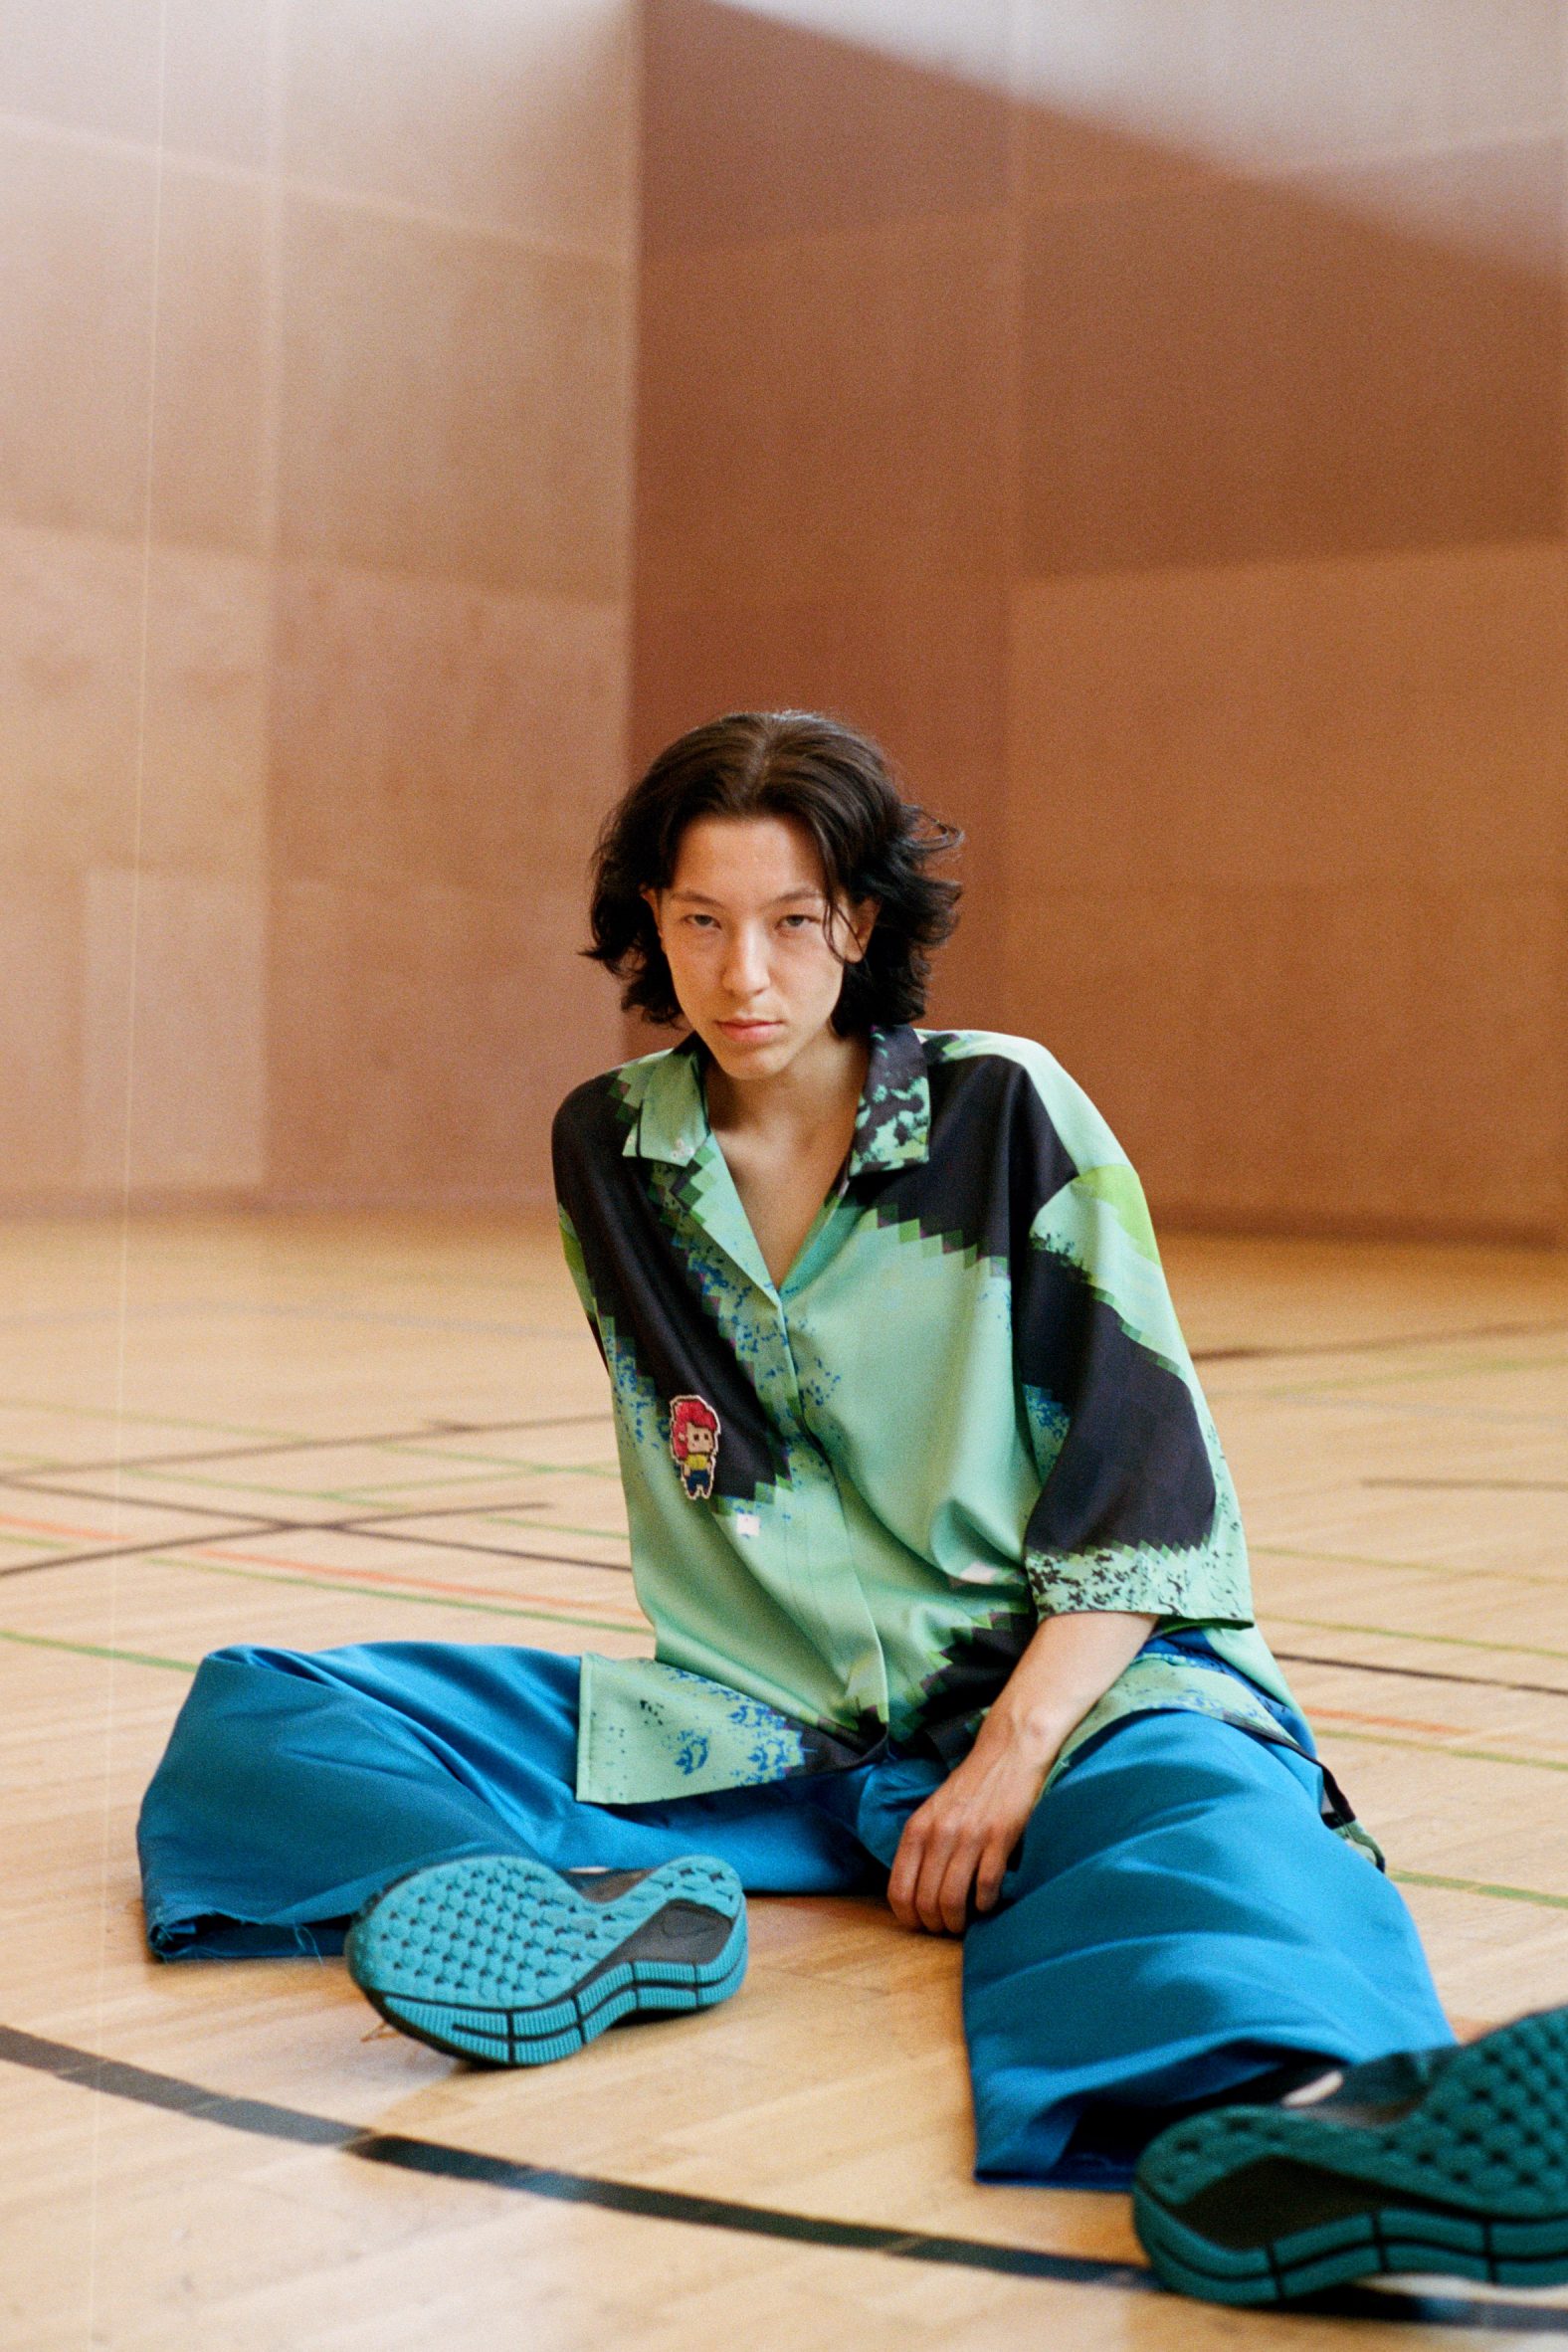 Seated model wears blue trousers and green and black shirt